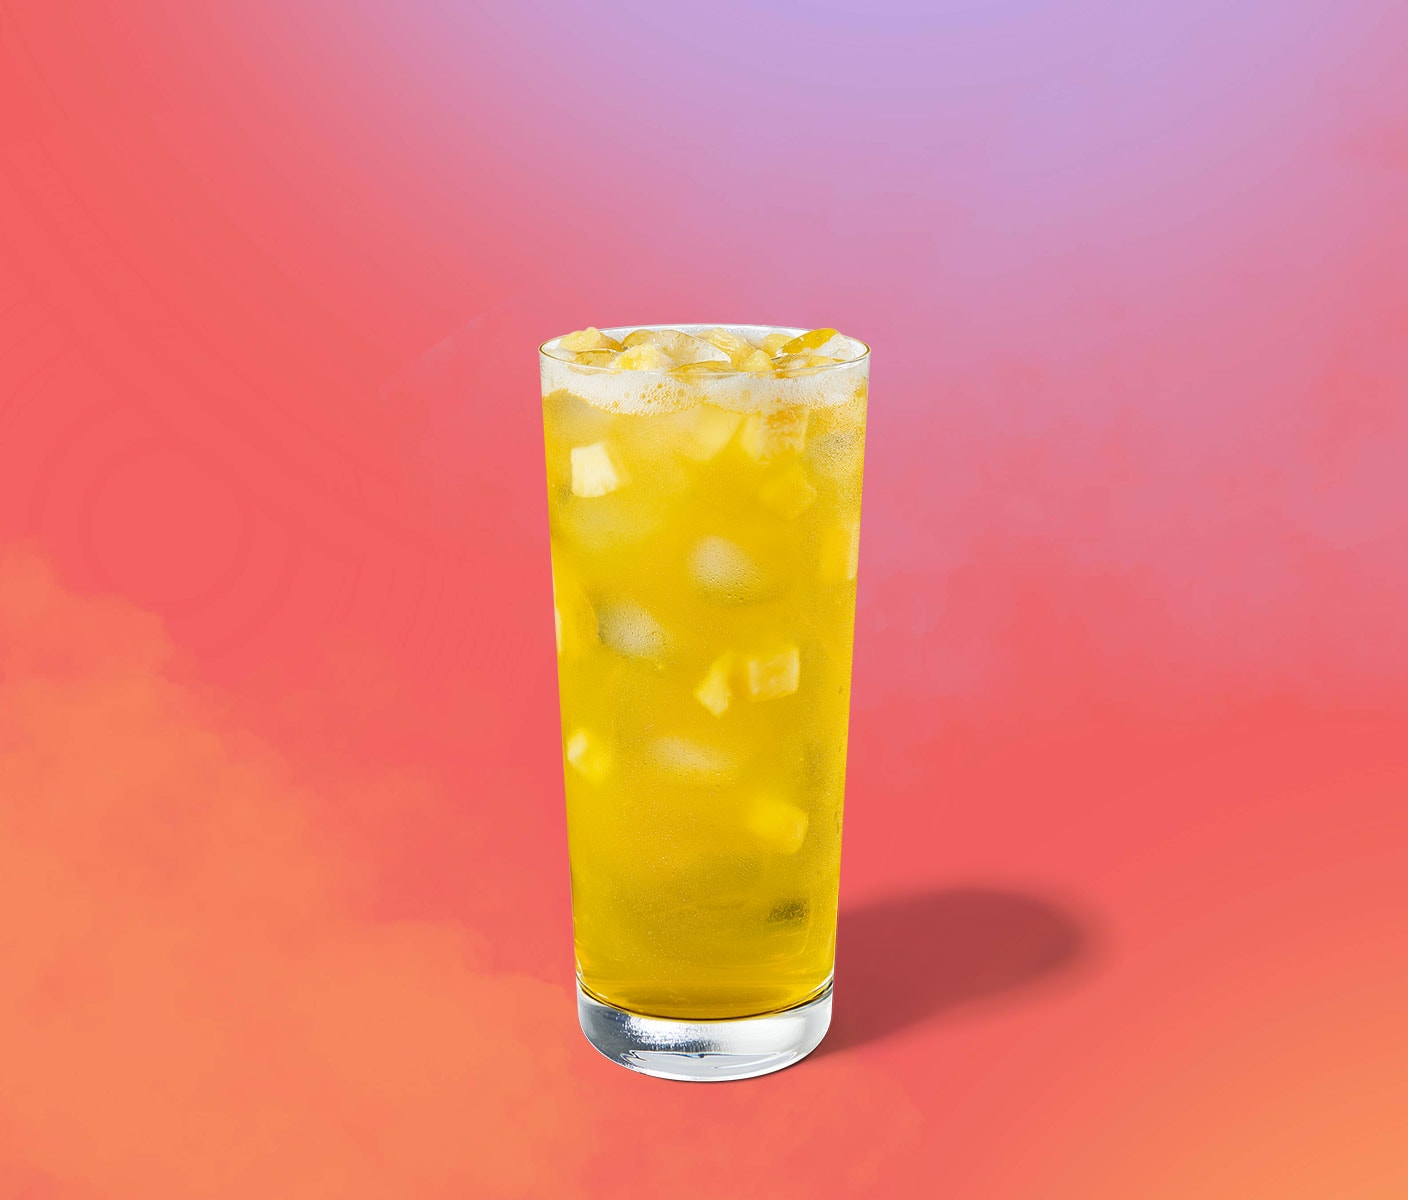 Bright-yellow iced drink with pineapple inclusions in a tall glass.